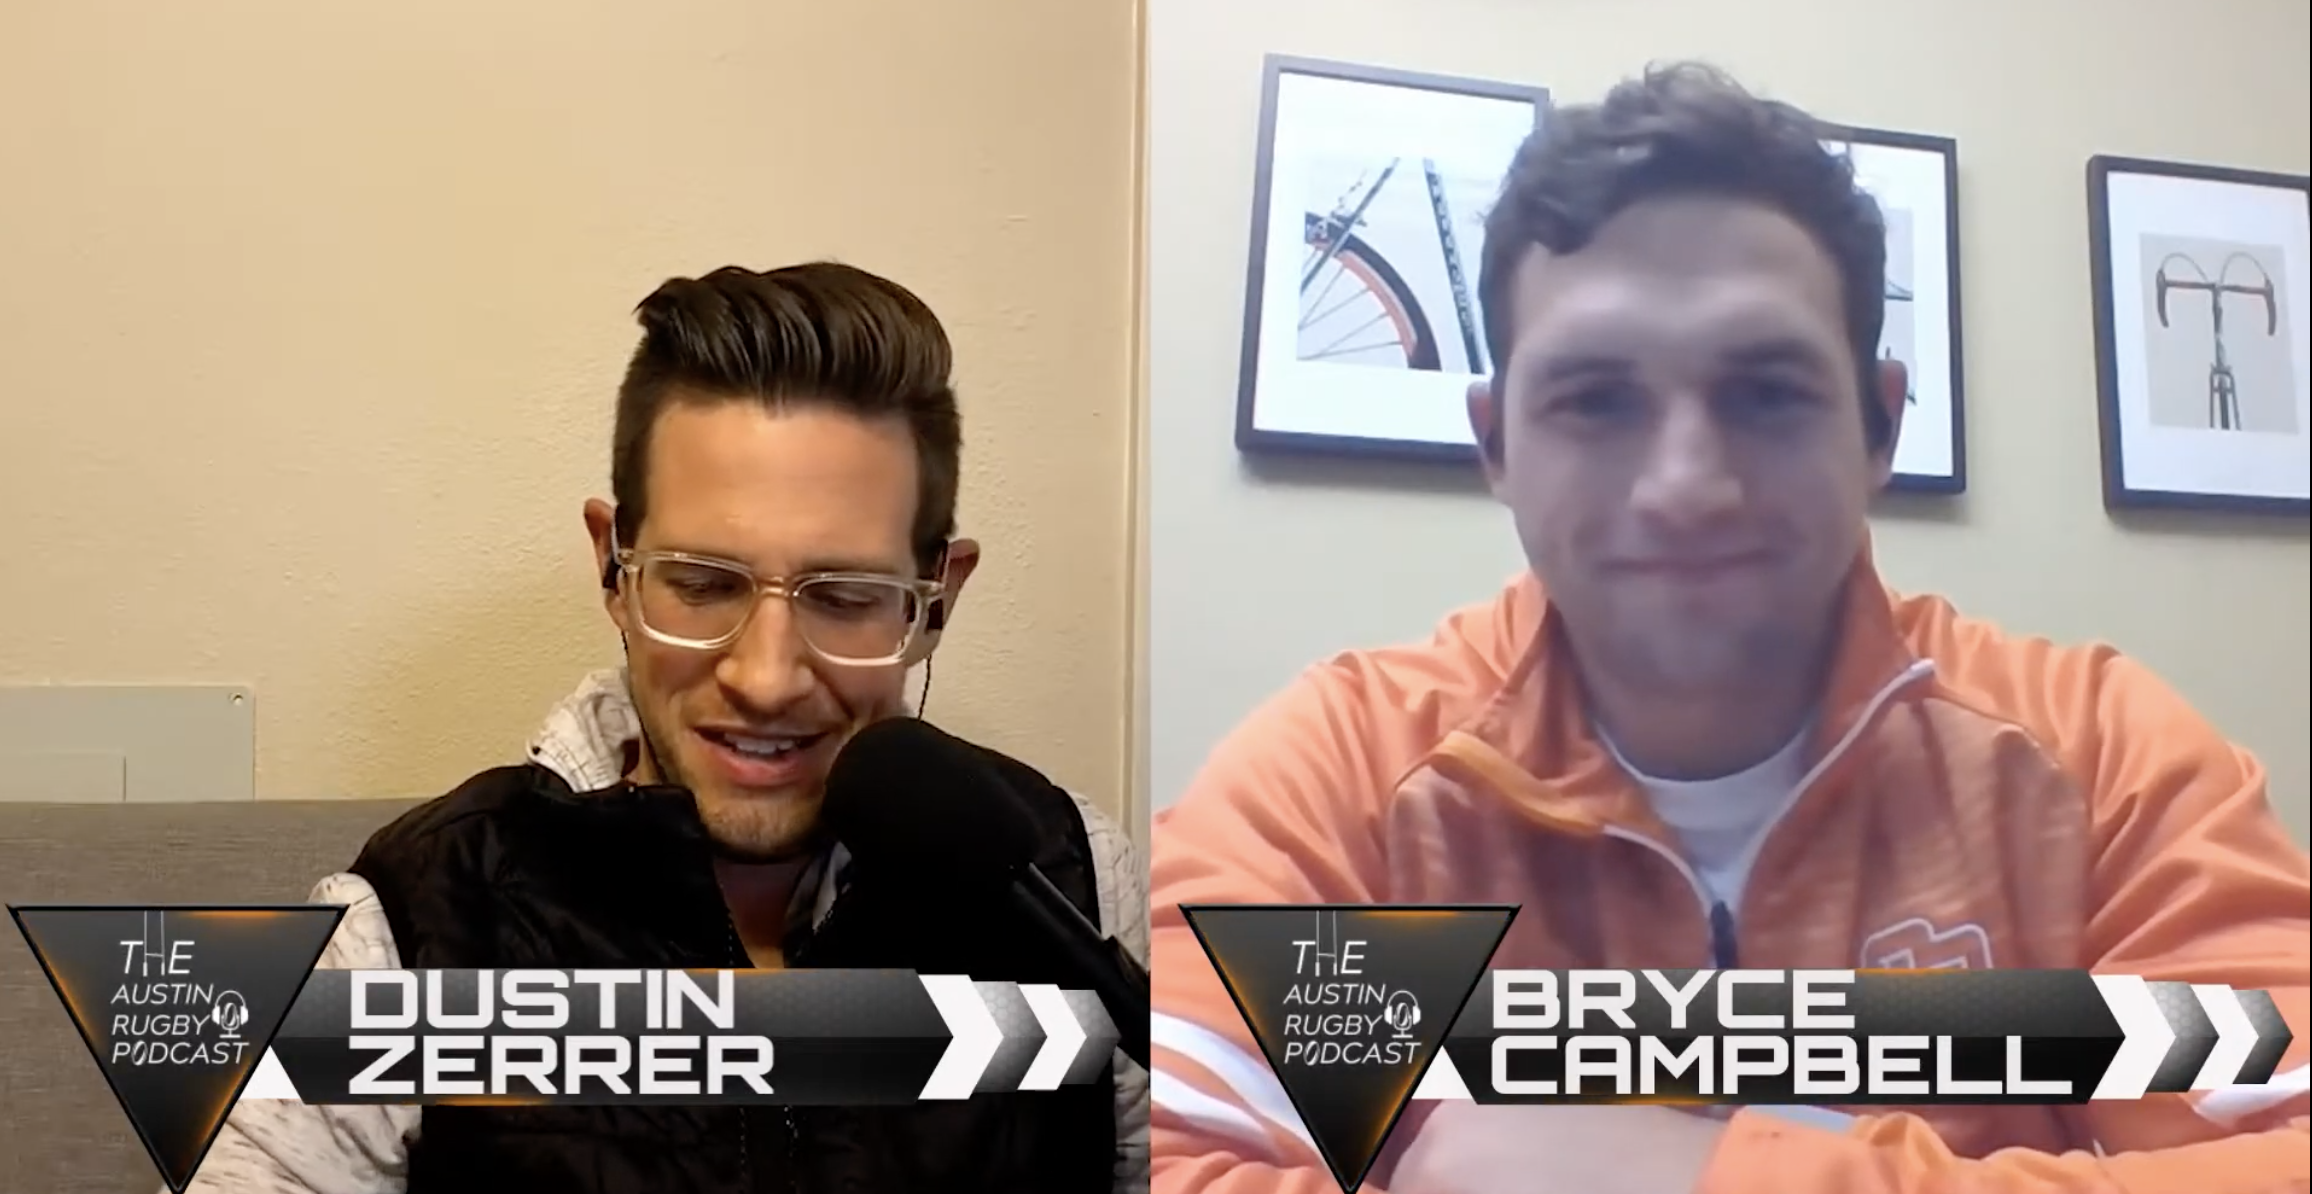 The Austin Rugby Podcast Features Bryce Campbell